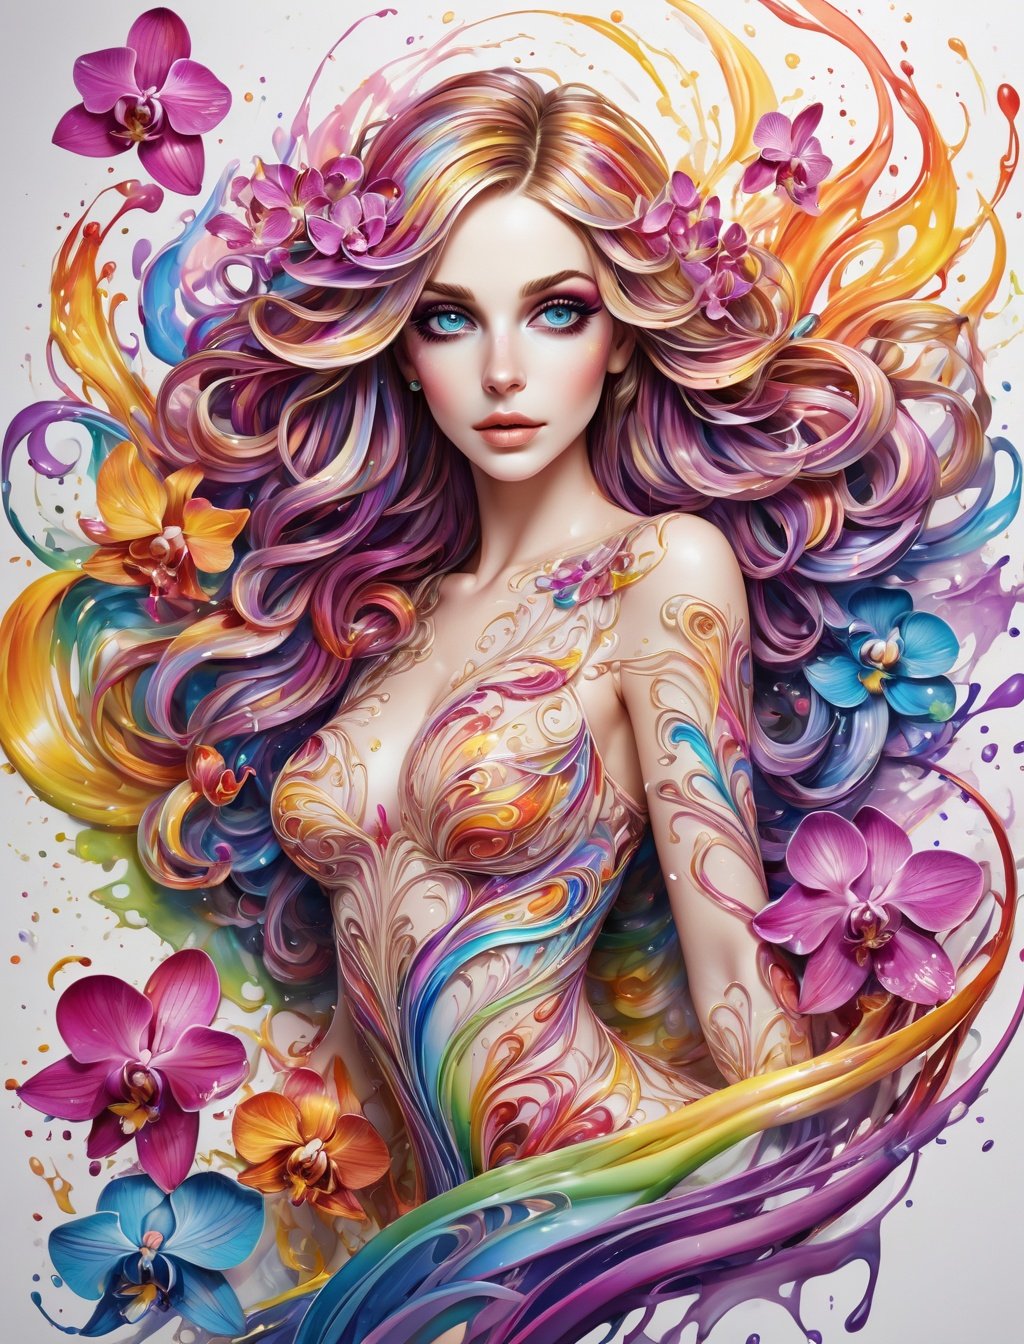 thin and thick color lines stroke, ink splash art, 1 liquid luminous lady made of colors, liquid Orchid flowers, filigree, filigree detailed, swirling rainbow flame, intricated pose, big beautiul eyes, slim waist, ,huayu,flower